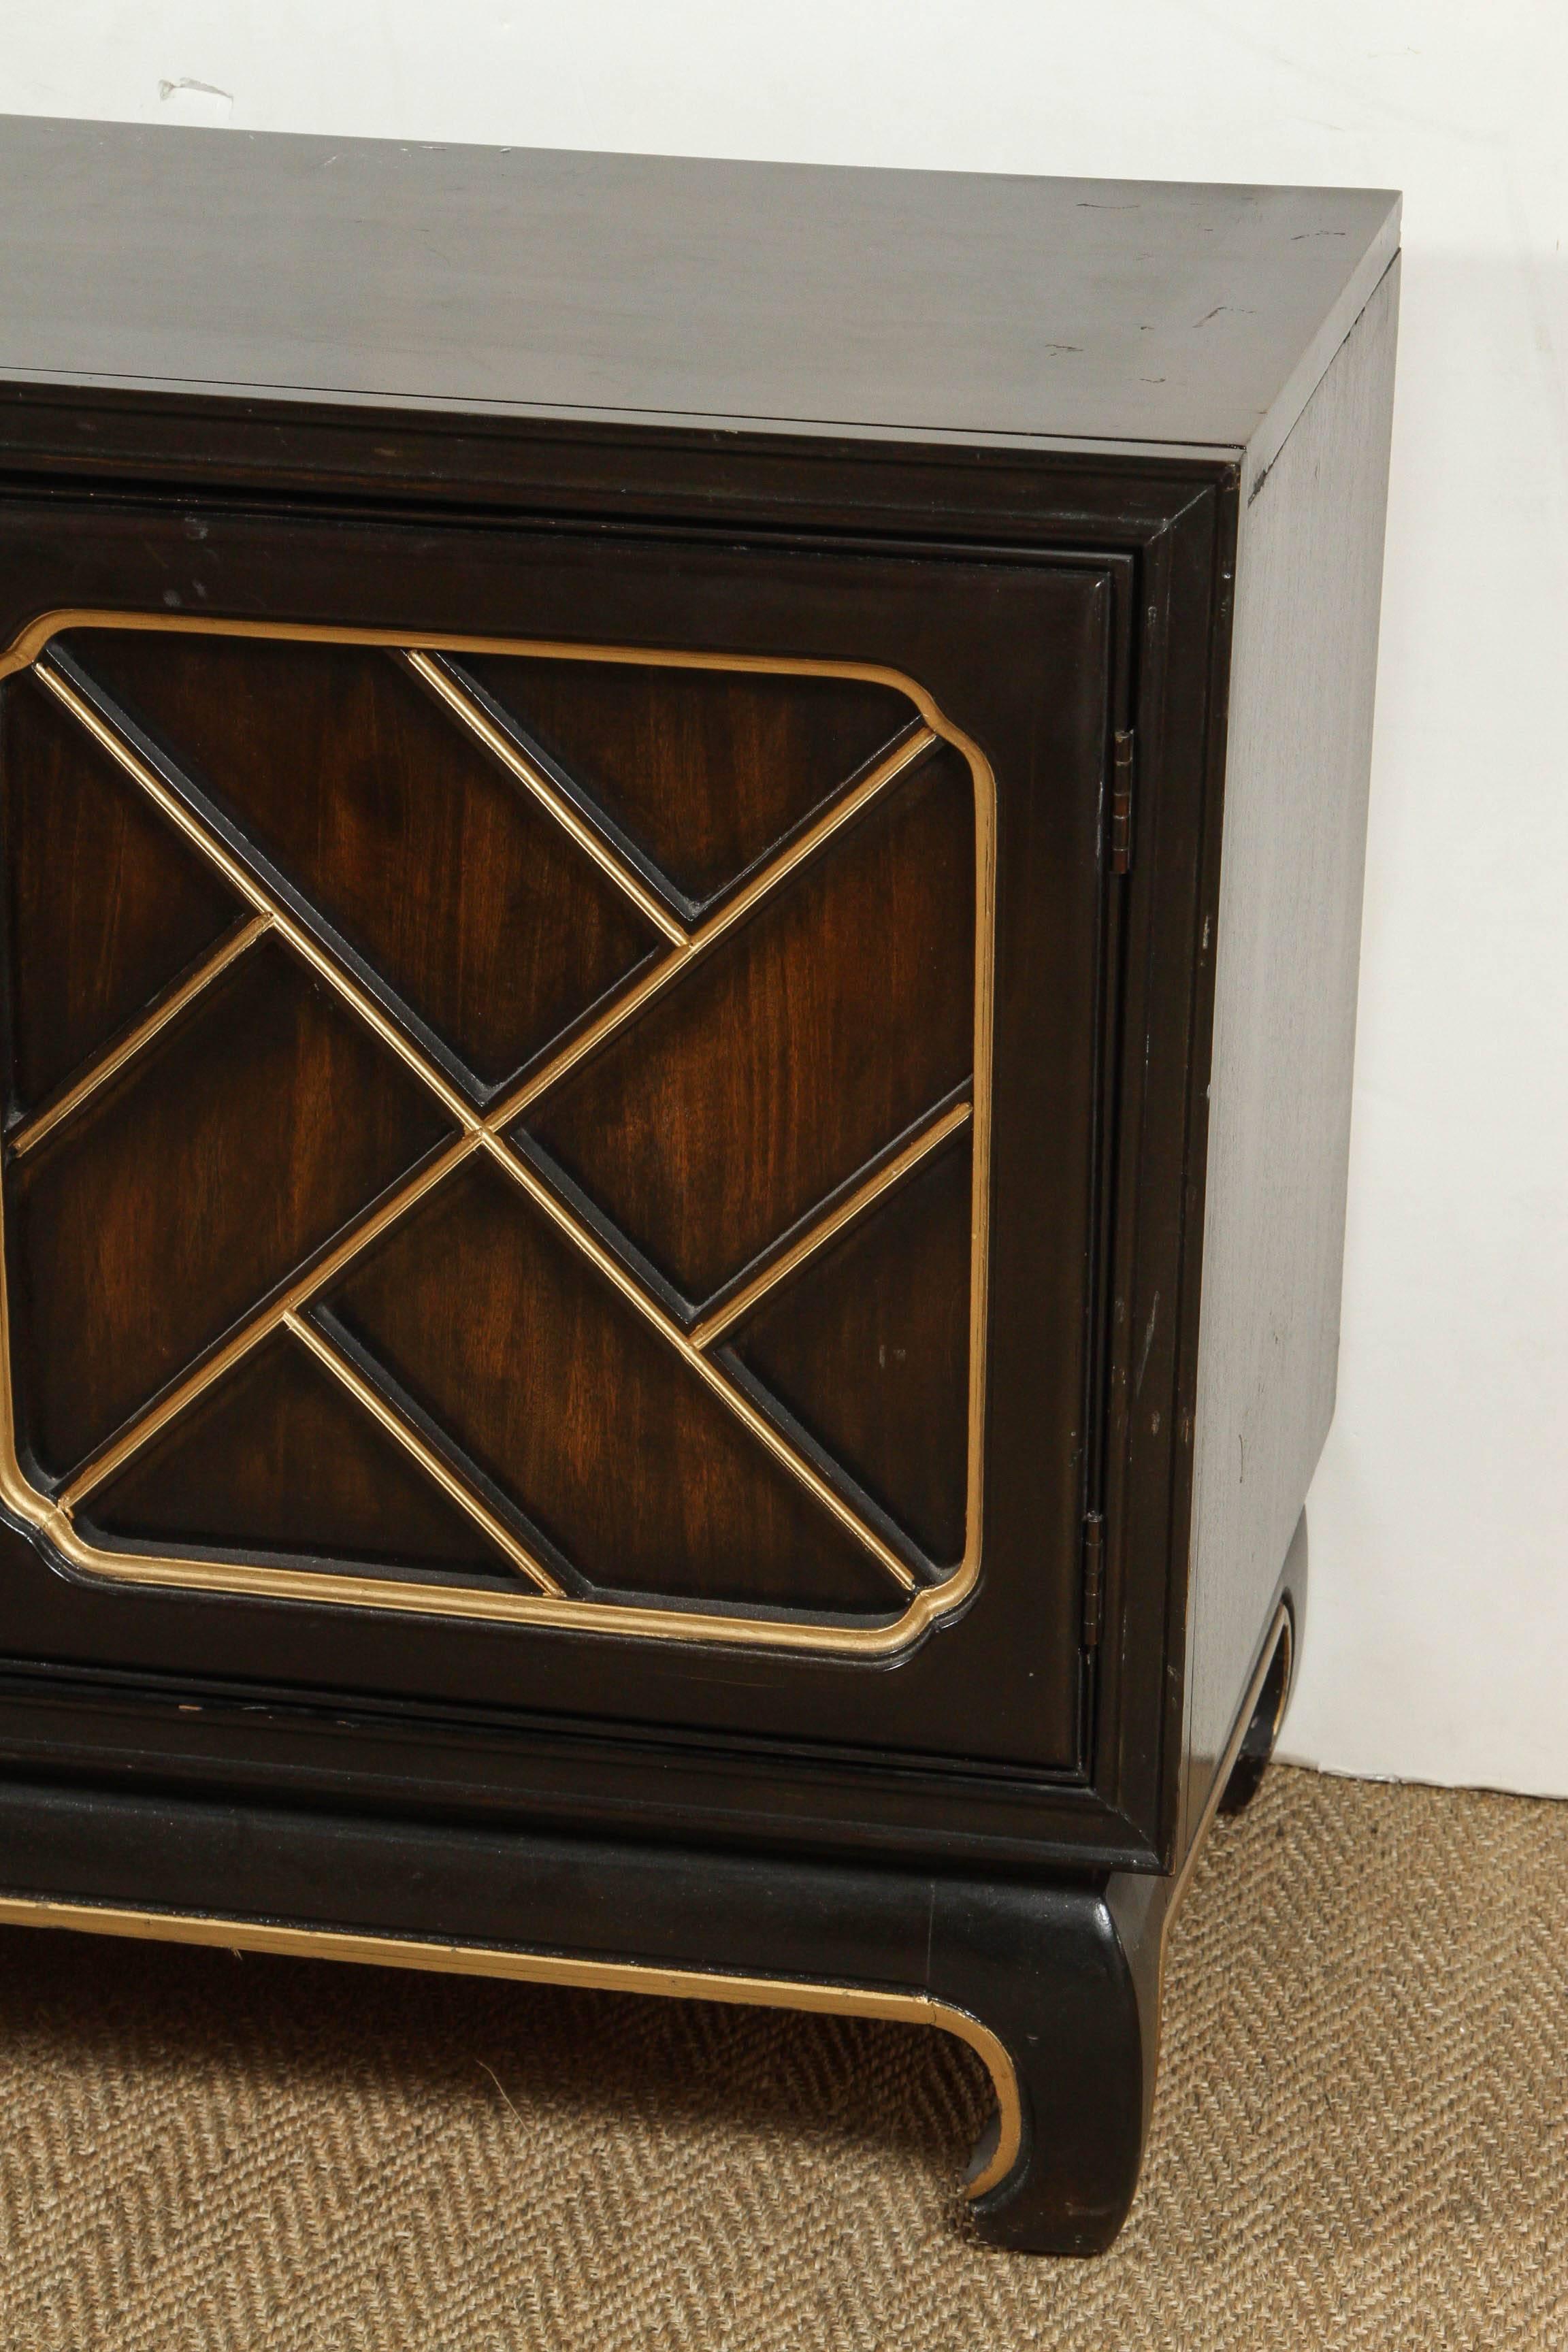 Dark chestnut Chippendales style credenza with bamboo detail on the front with gold handles on the drawers.